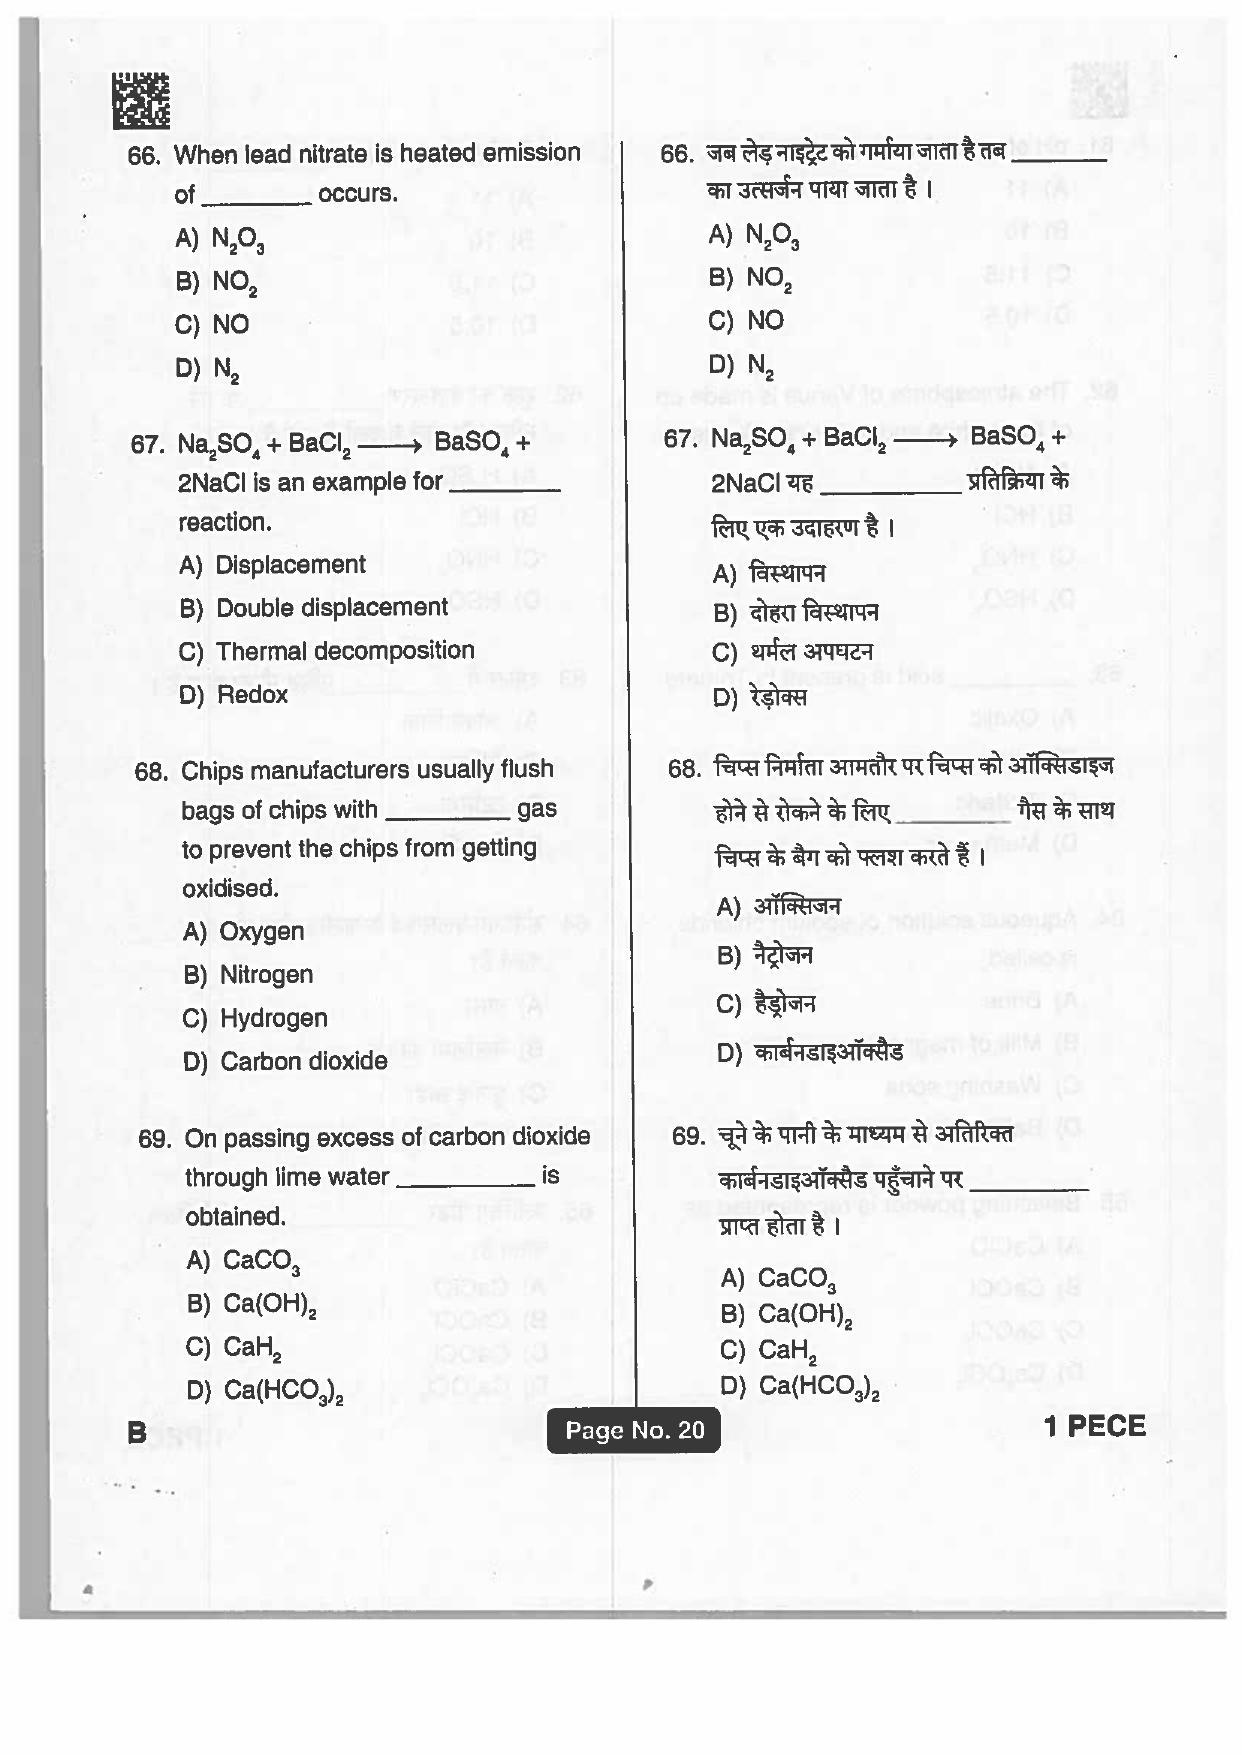 Jharkhand Polytechnic SET B 2019 Question Paper with Answers - Page 19